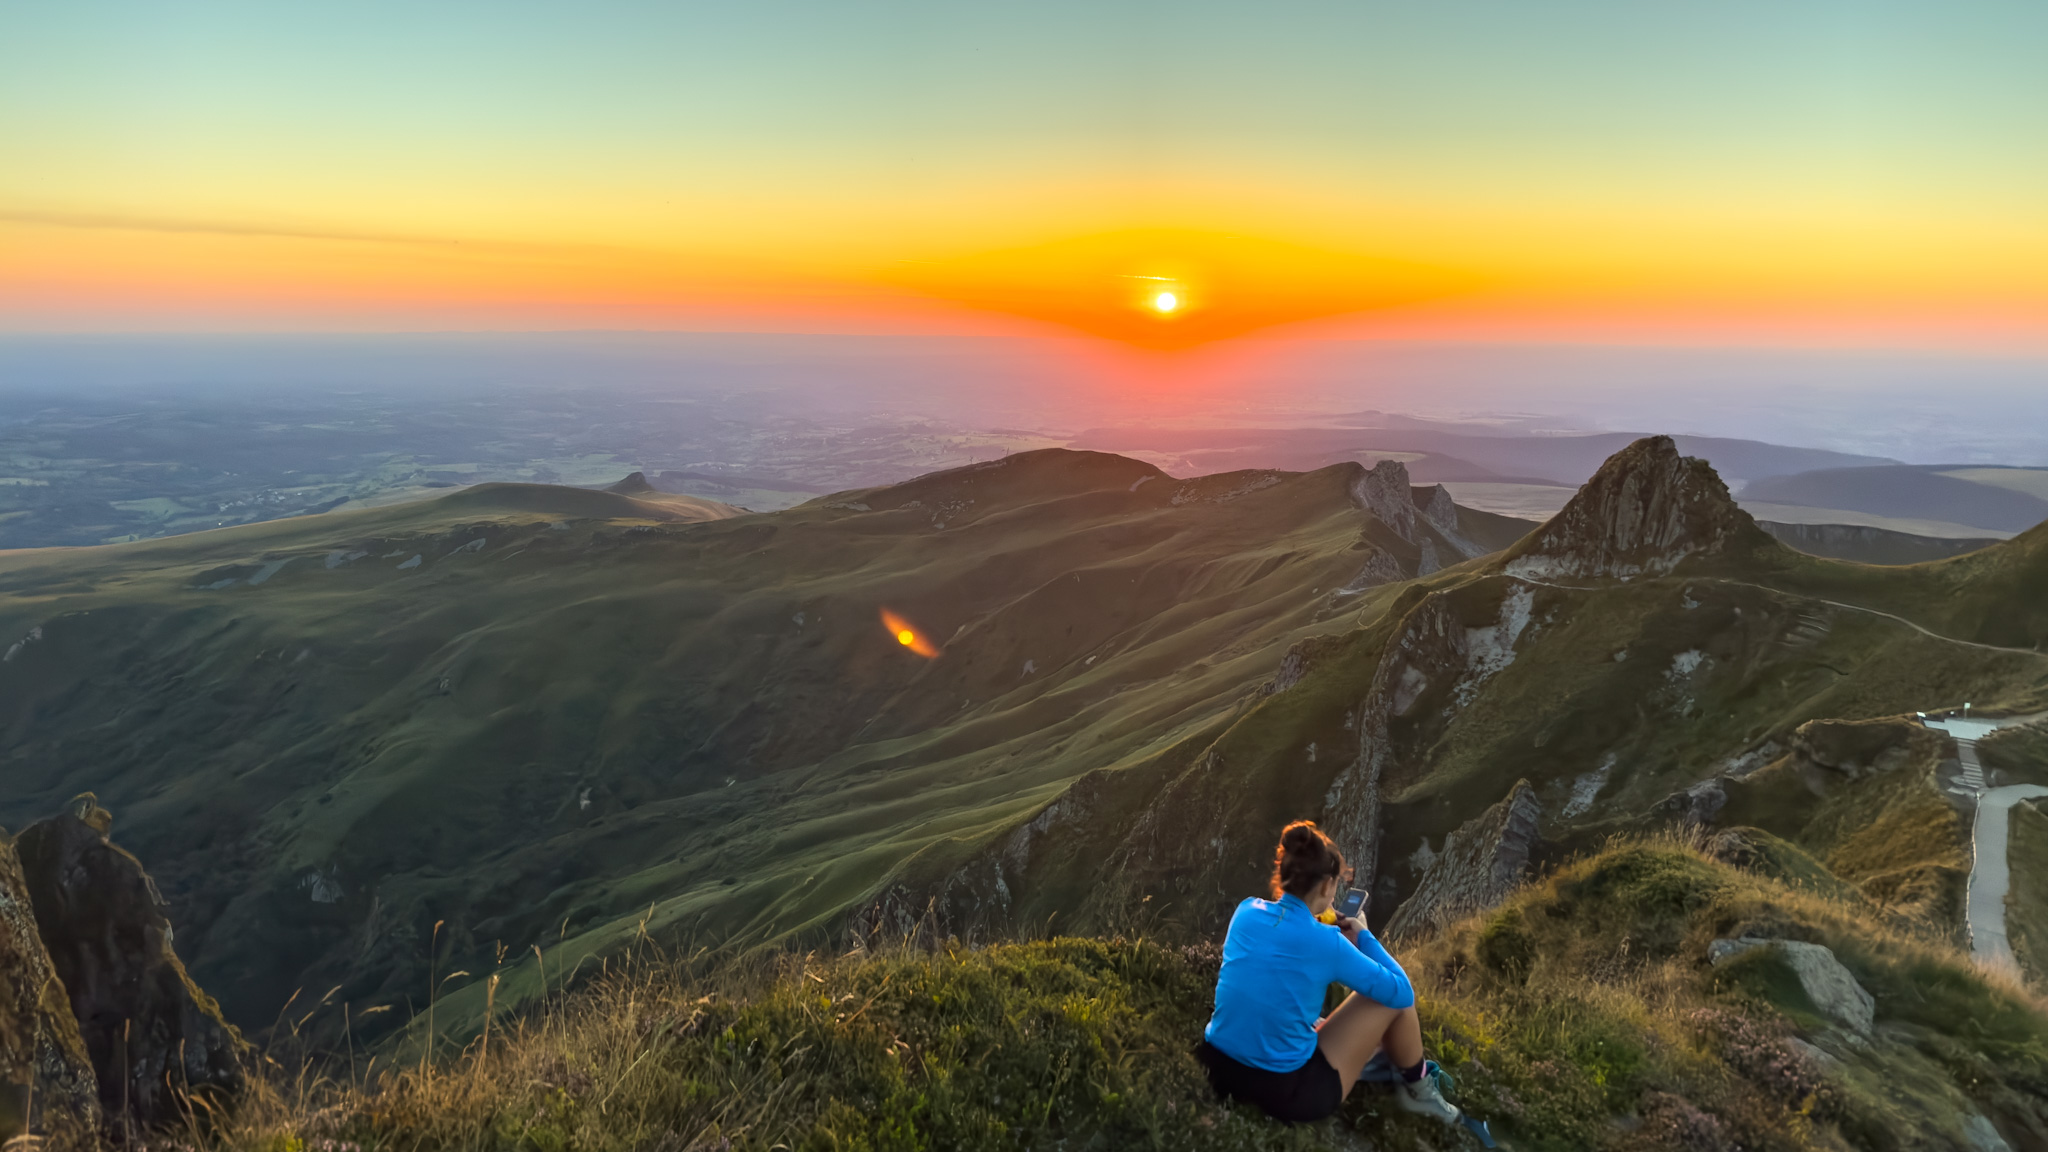 Super Besse, Sunset at the Summit of Sancy